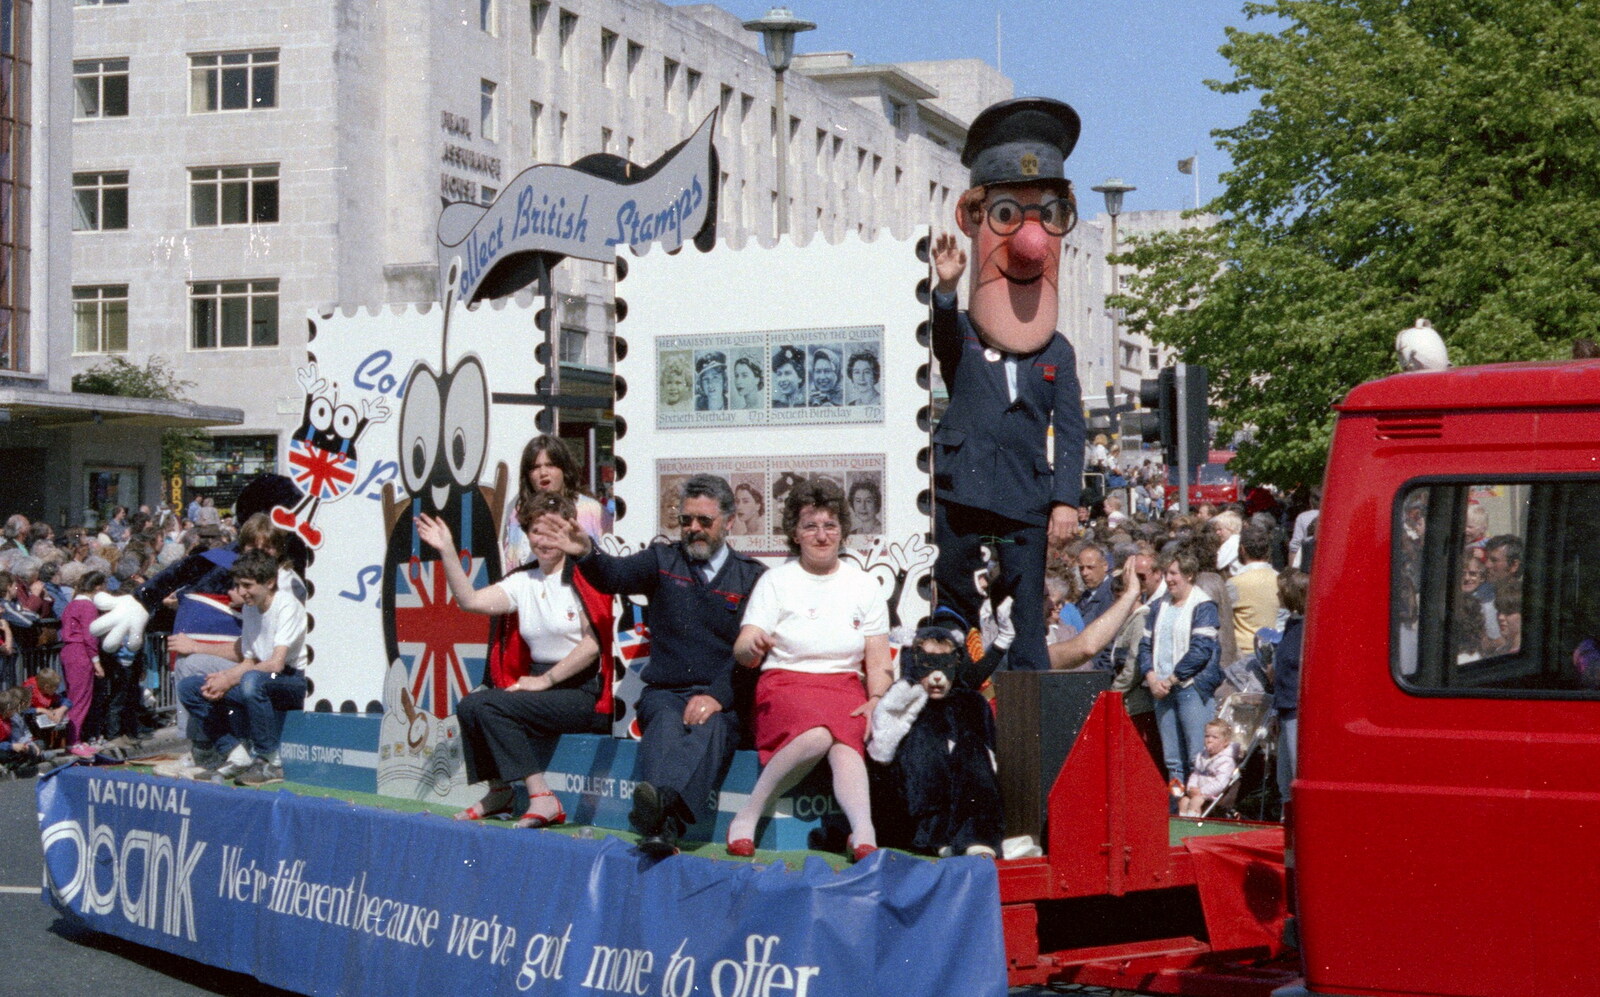 Postman Pat on the back of a Post Office float from Uni: The Lord Mayor's Procession, Plymouth, Devon - 21st May 1986